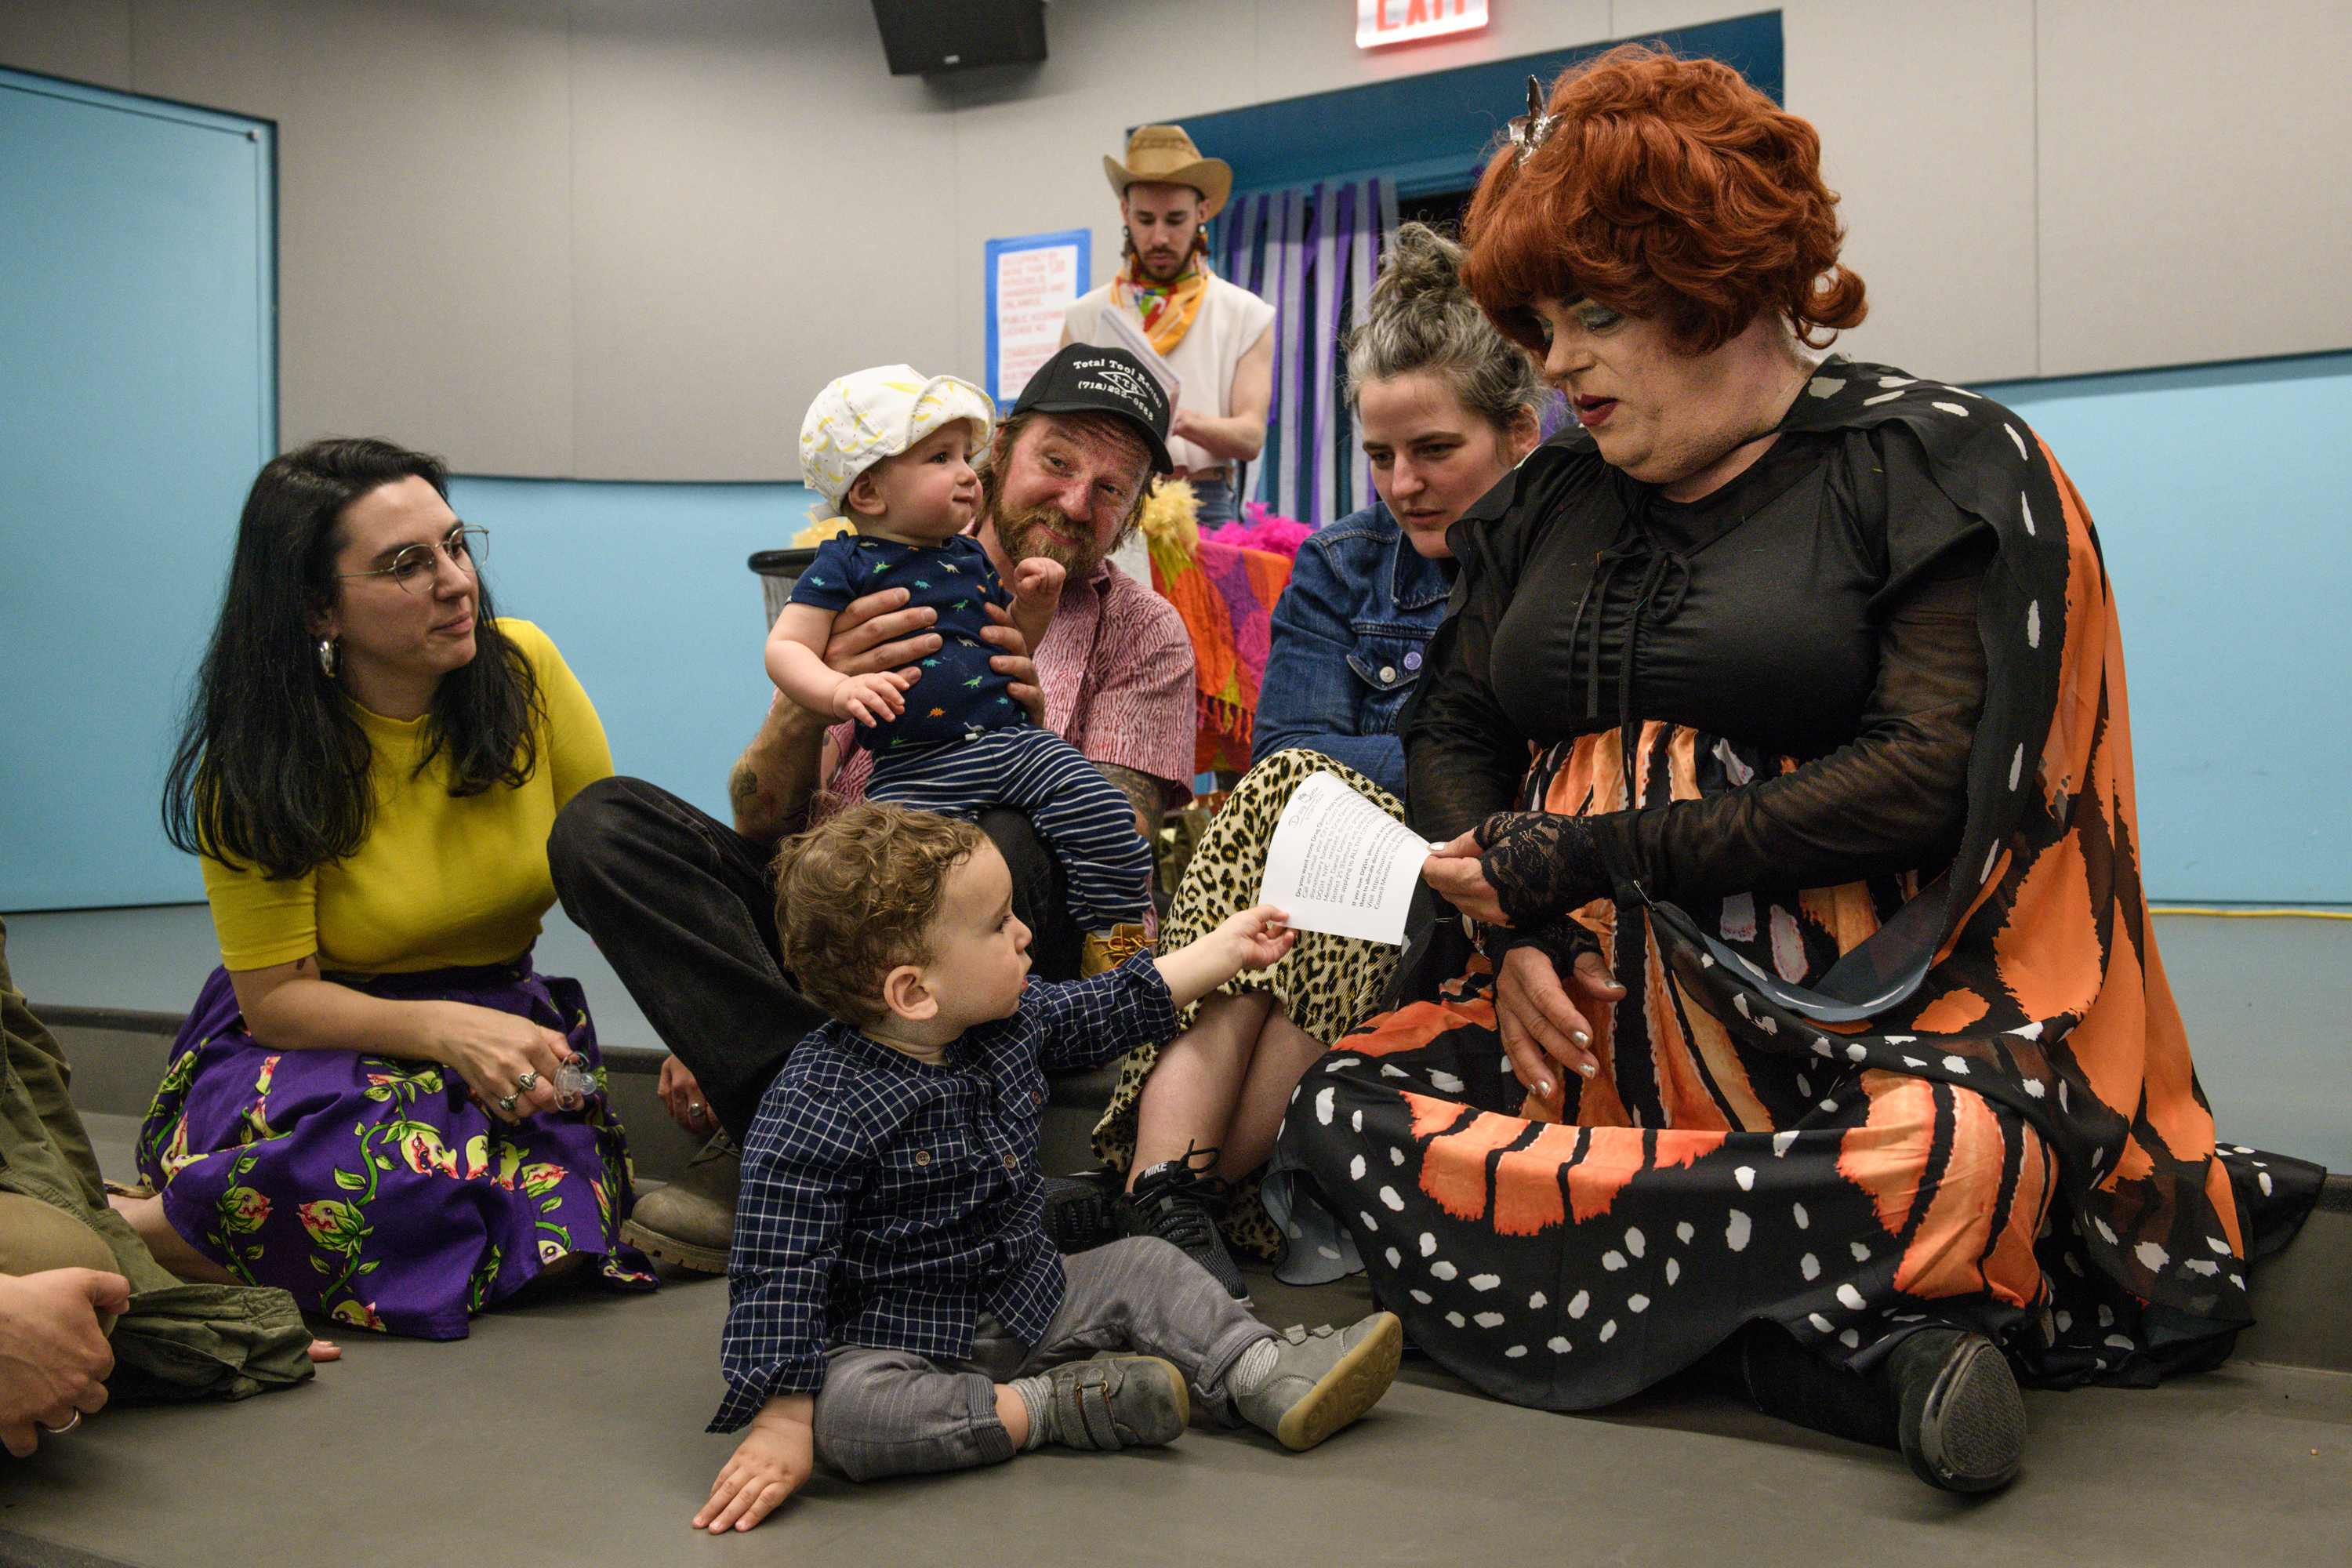 2018-New York- Earth Day Drag Queen Story Hour with Rev. Yolanda at Brooklyn Children’s Museum